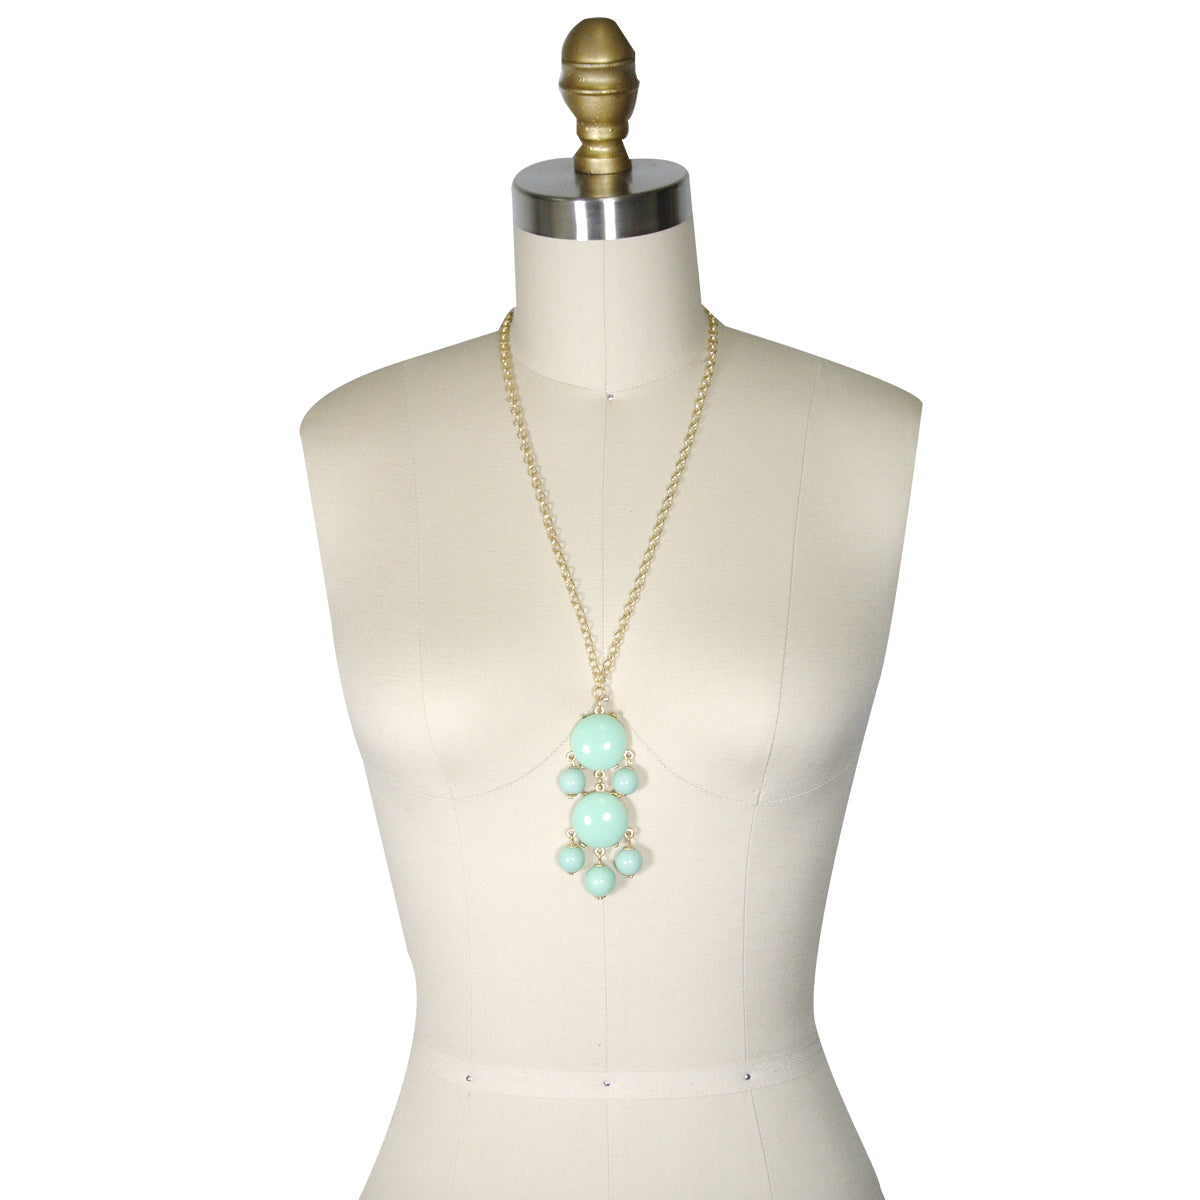 Mint Green Beaded Bubble Pendant Necklace + White Drop Stone Necklace [A63876, A64562]